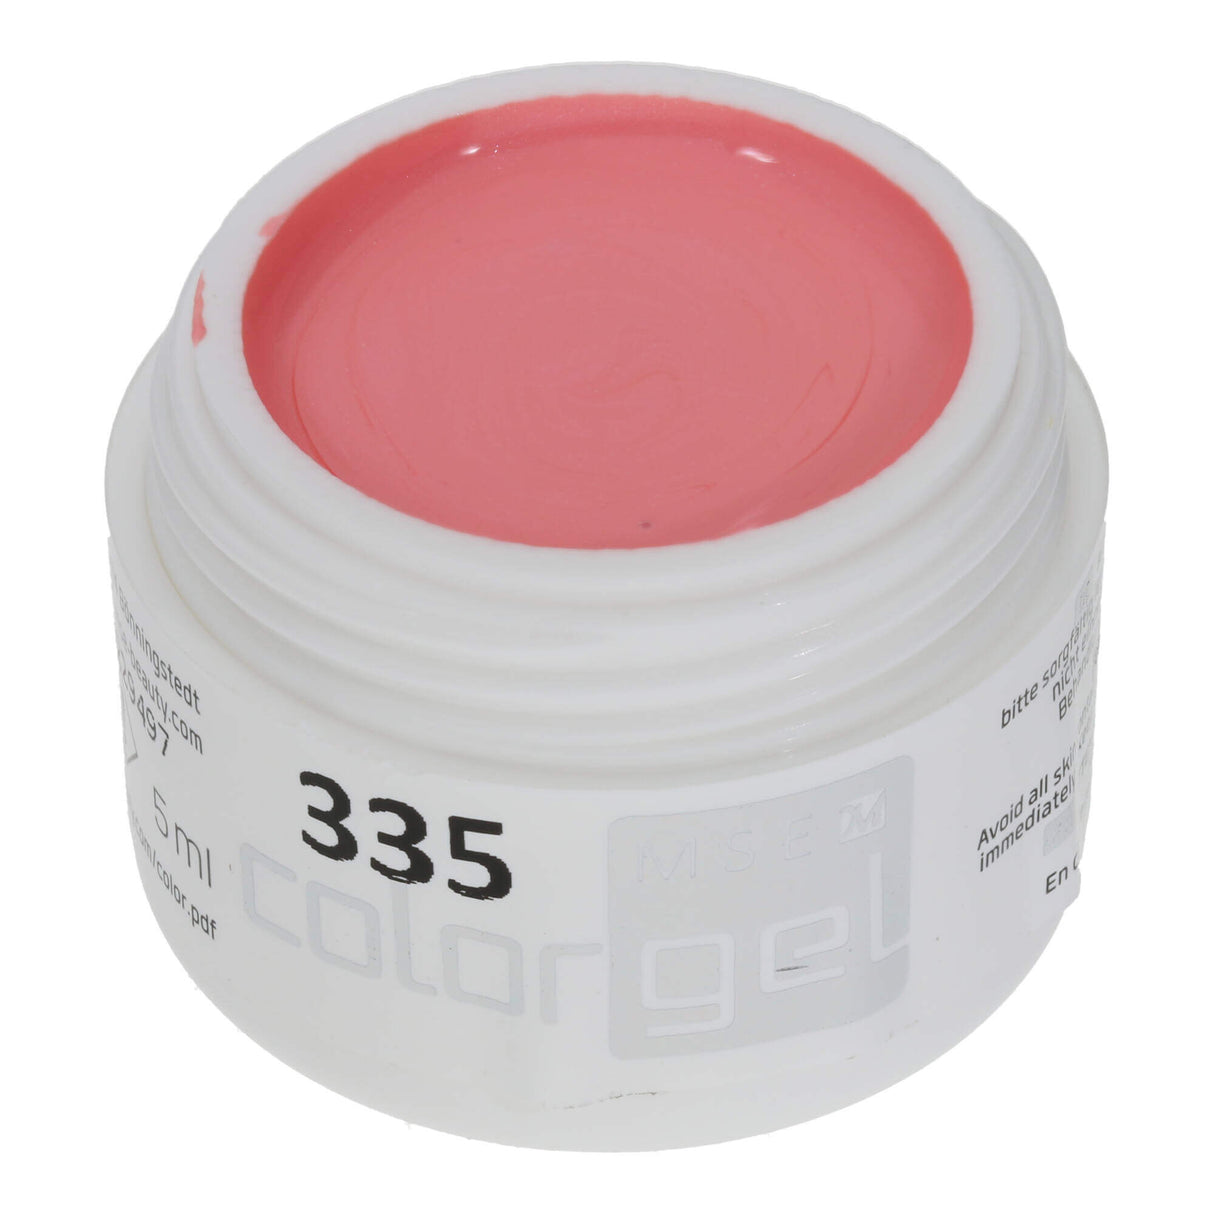 # 335 Premium EFFECT Color Gel 5ml Light pink with a very subtle pearl effect